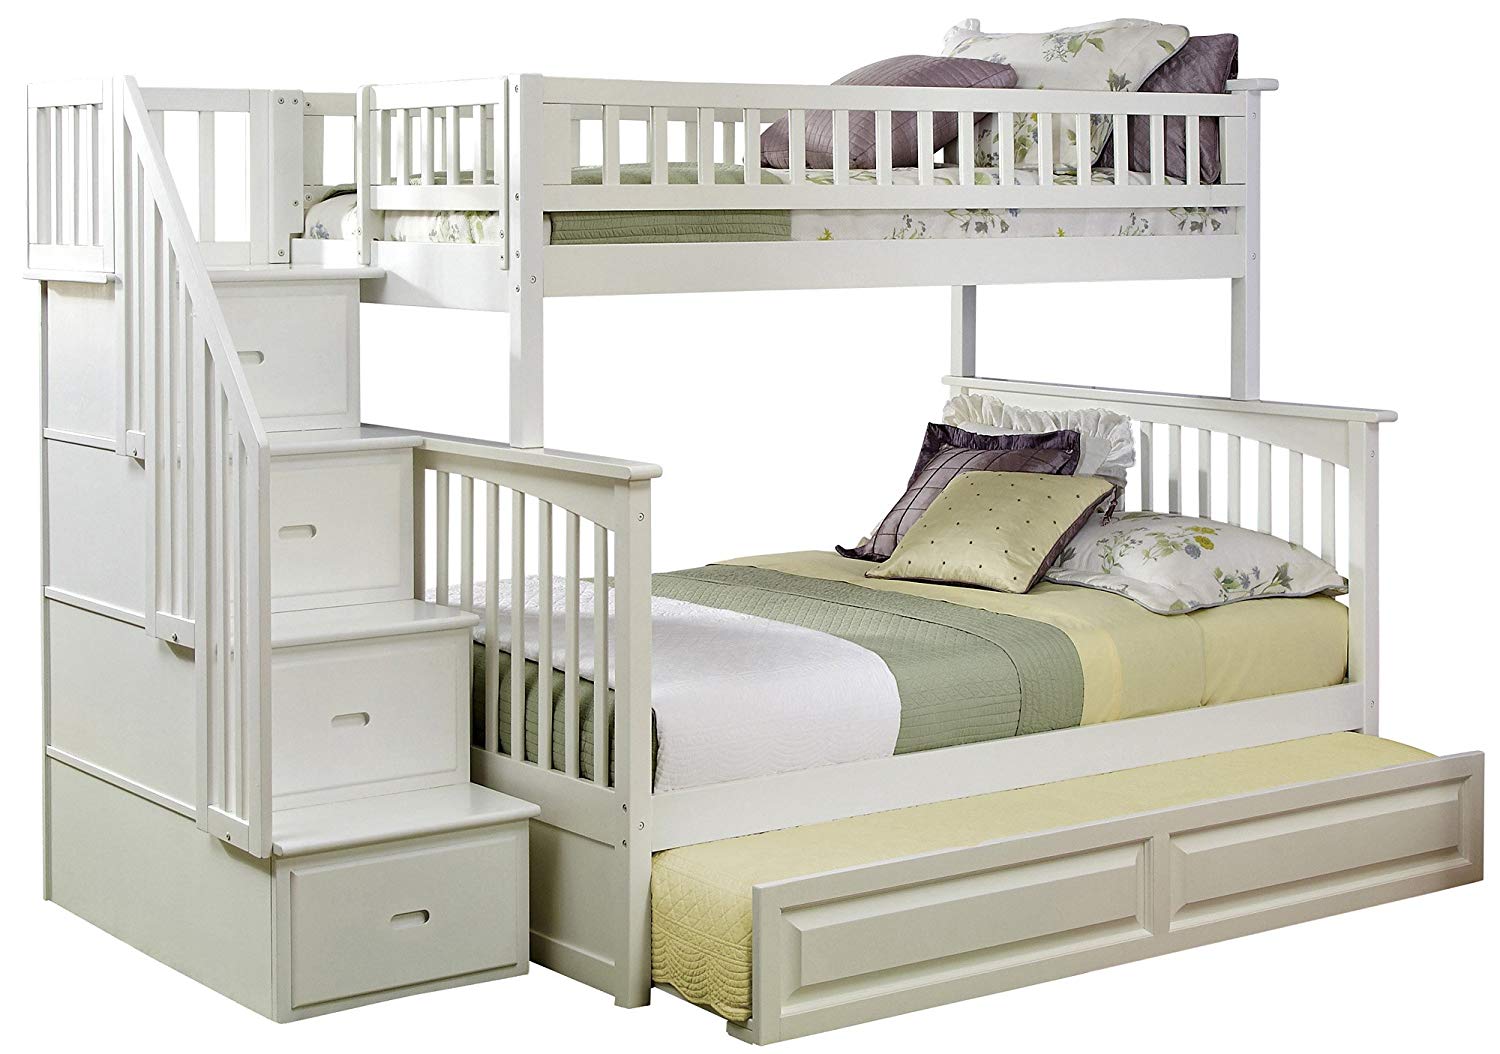 full over full bunk beds with trundle and stairs amazon.com: atlantic furniture columbia staircase bunk bed with trundle bed, HDJYUIL